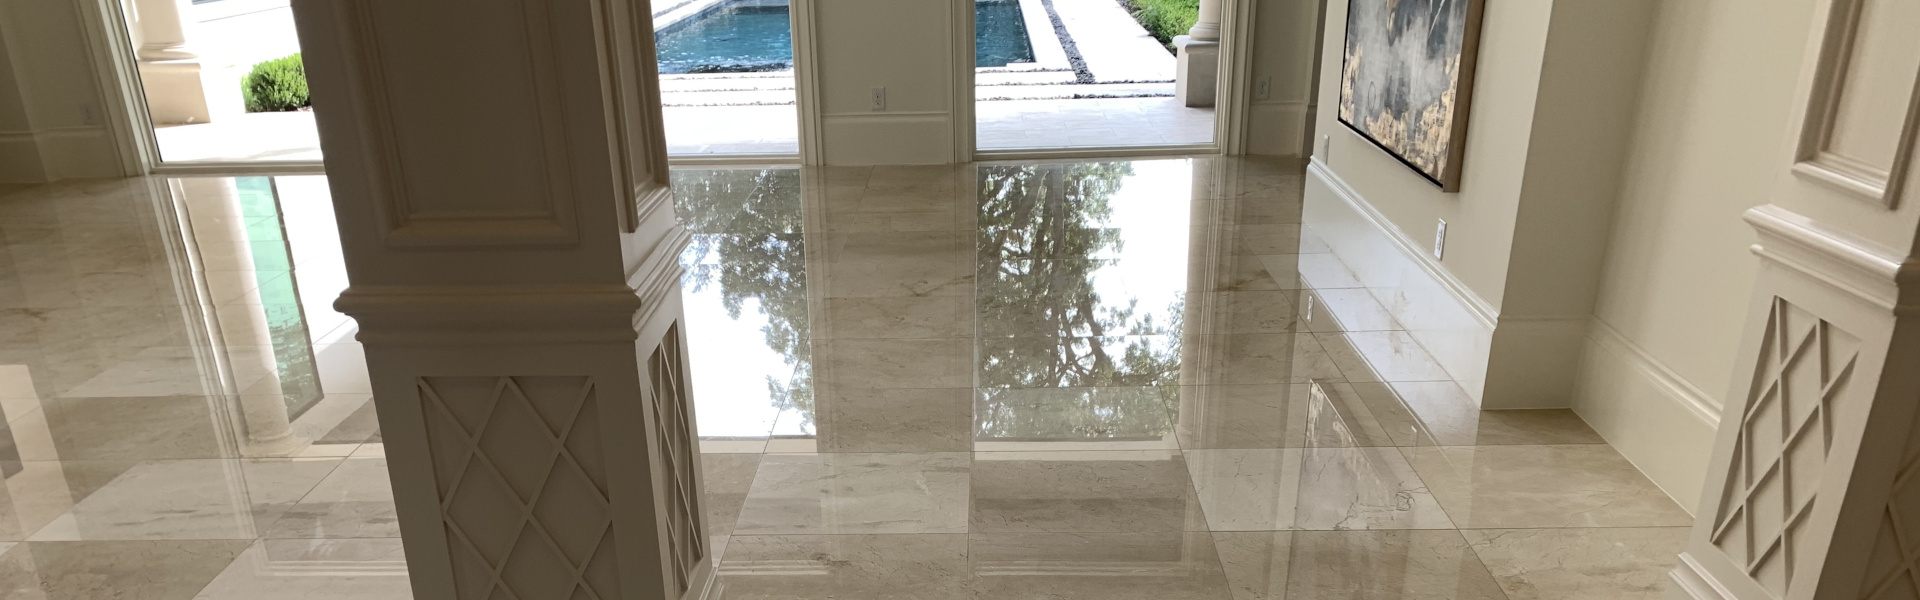 Sealing Travertine Before Grouting: Essential Tips for Long-Lasting Beauty